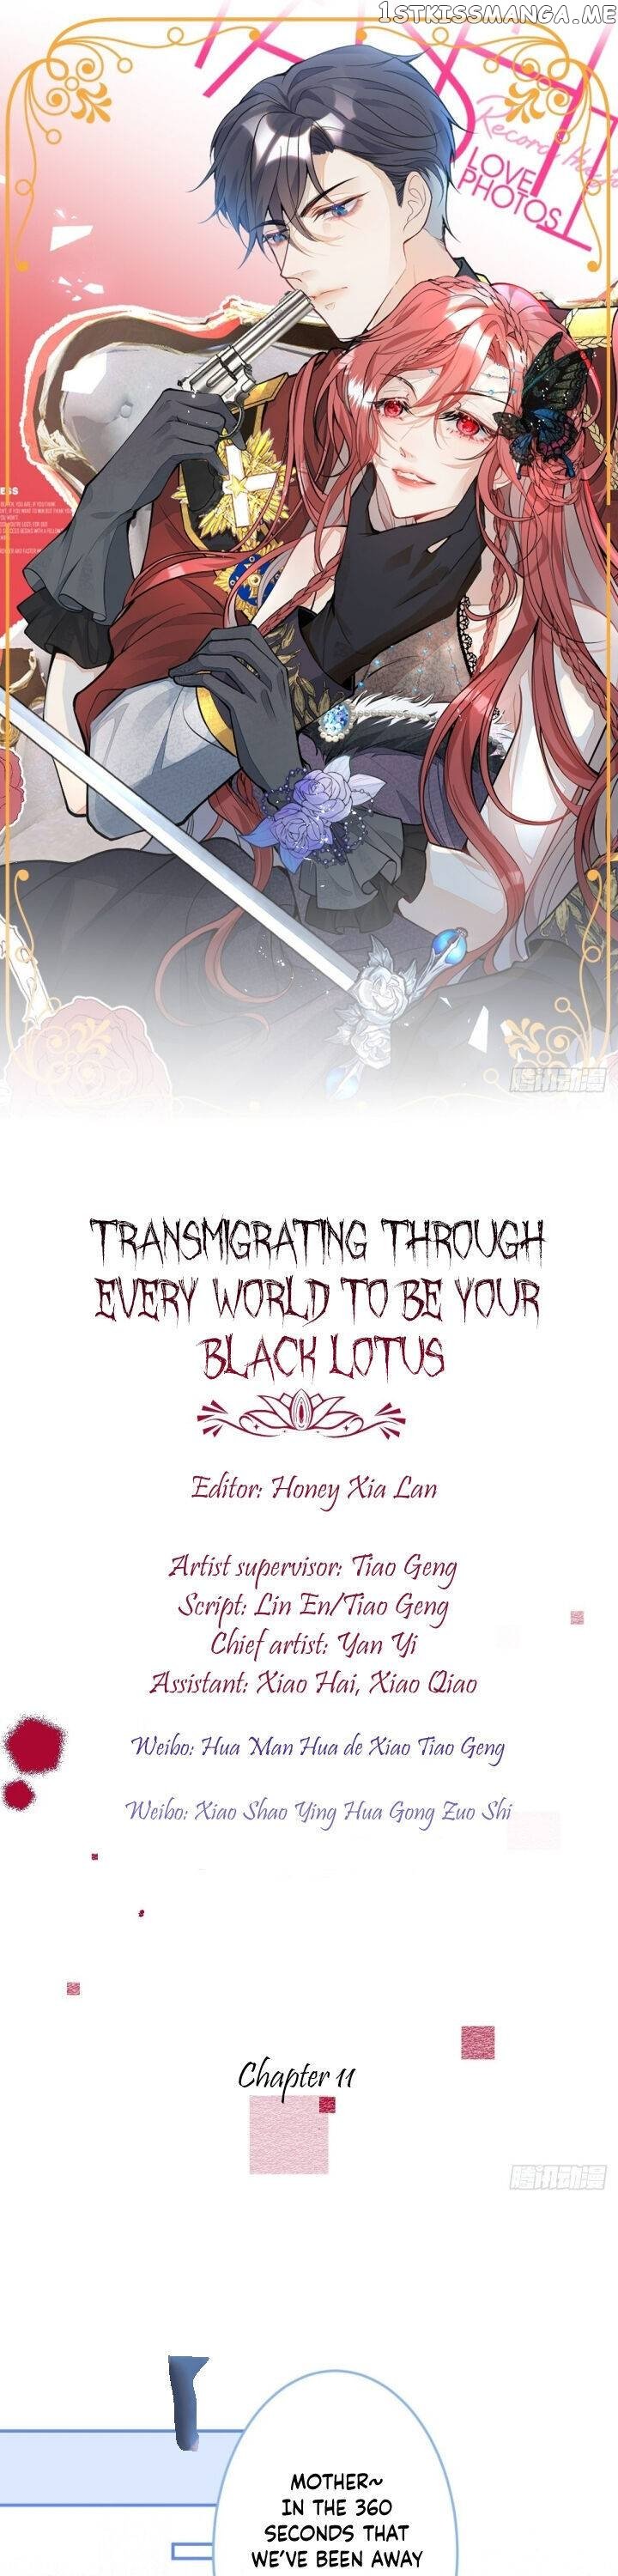 Transmigrating Through Every World To Be Your Black Lotus chapter 11